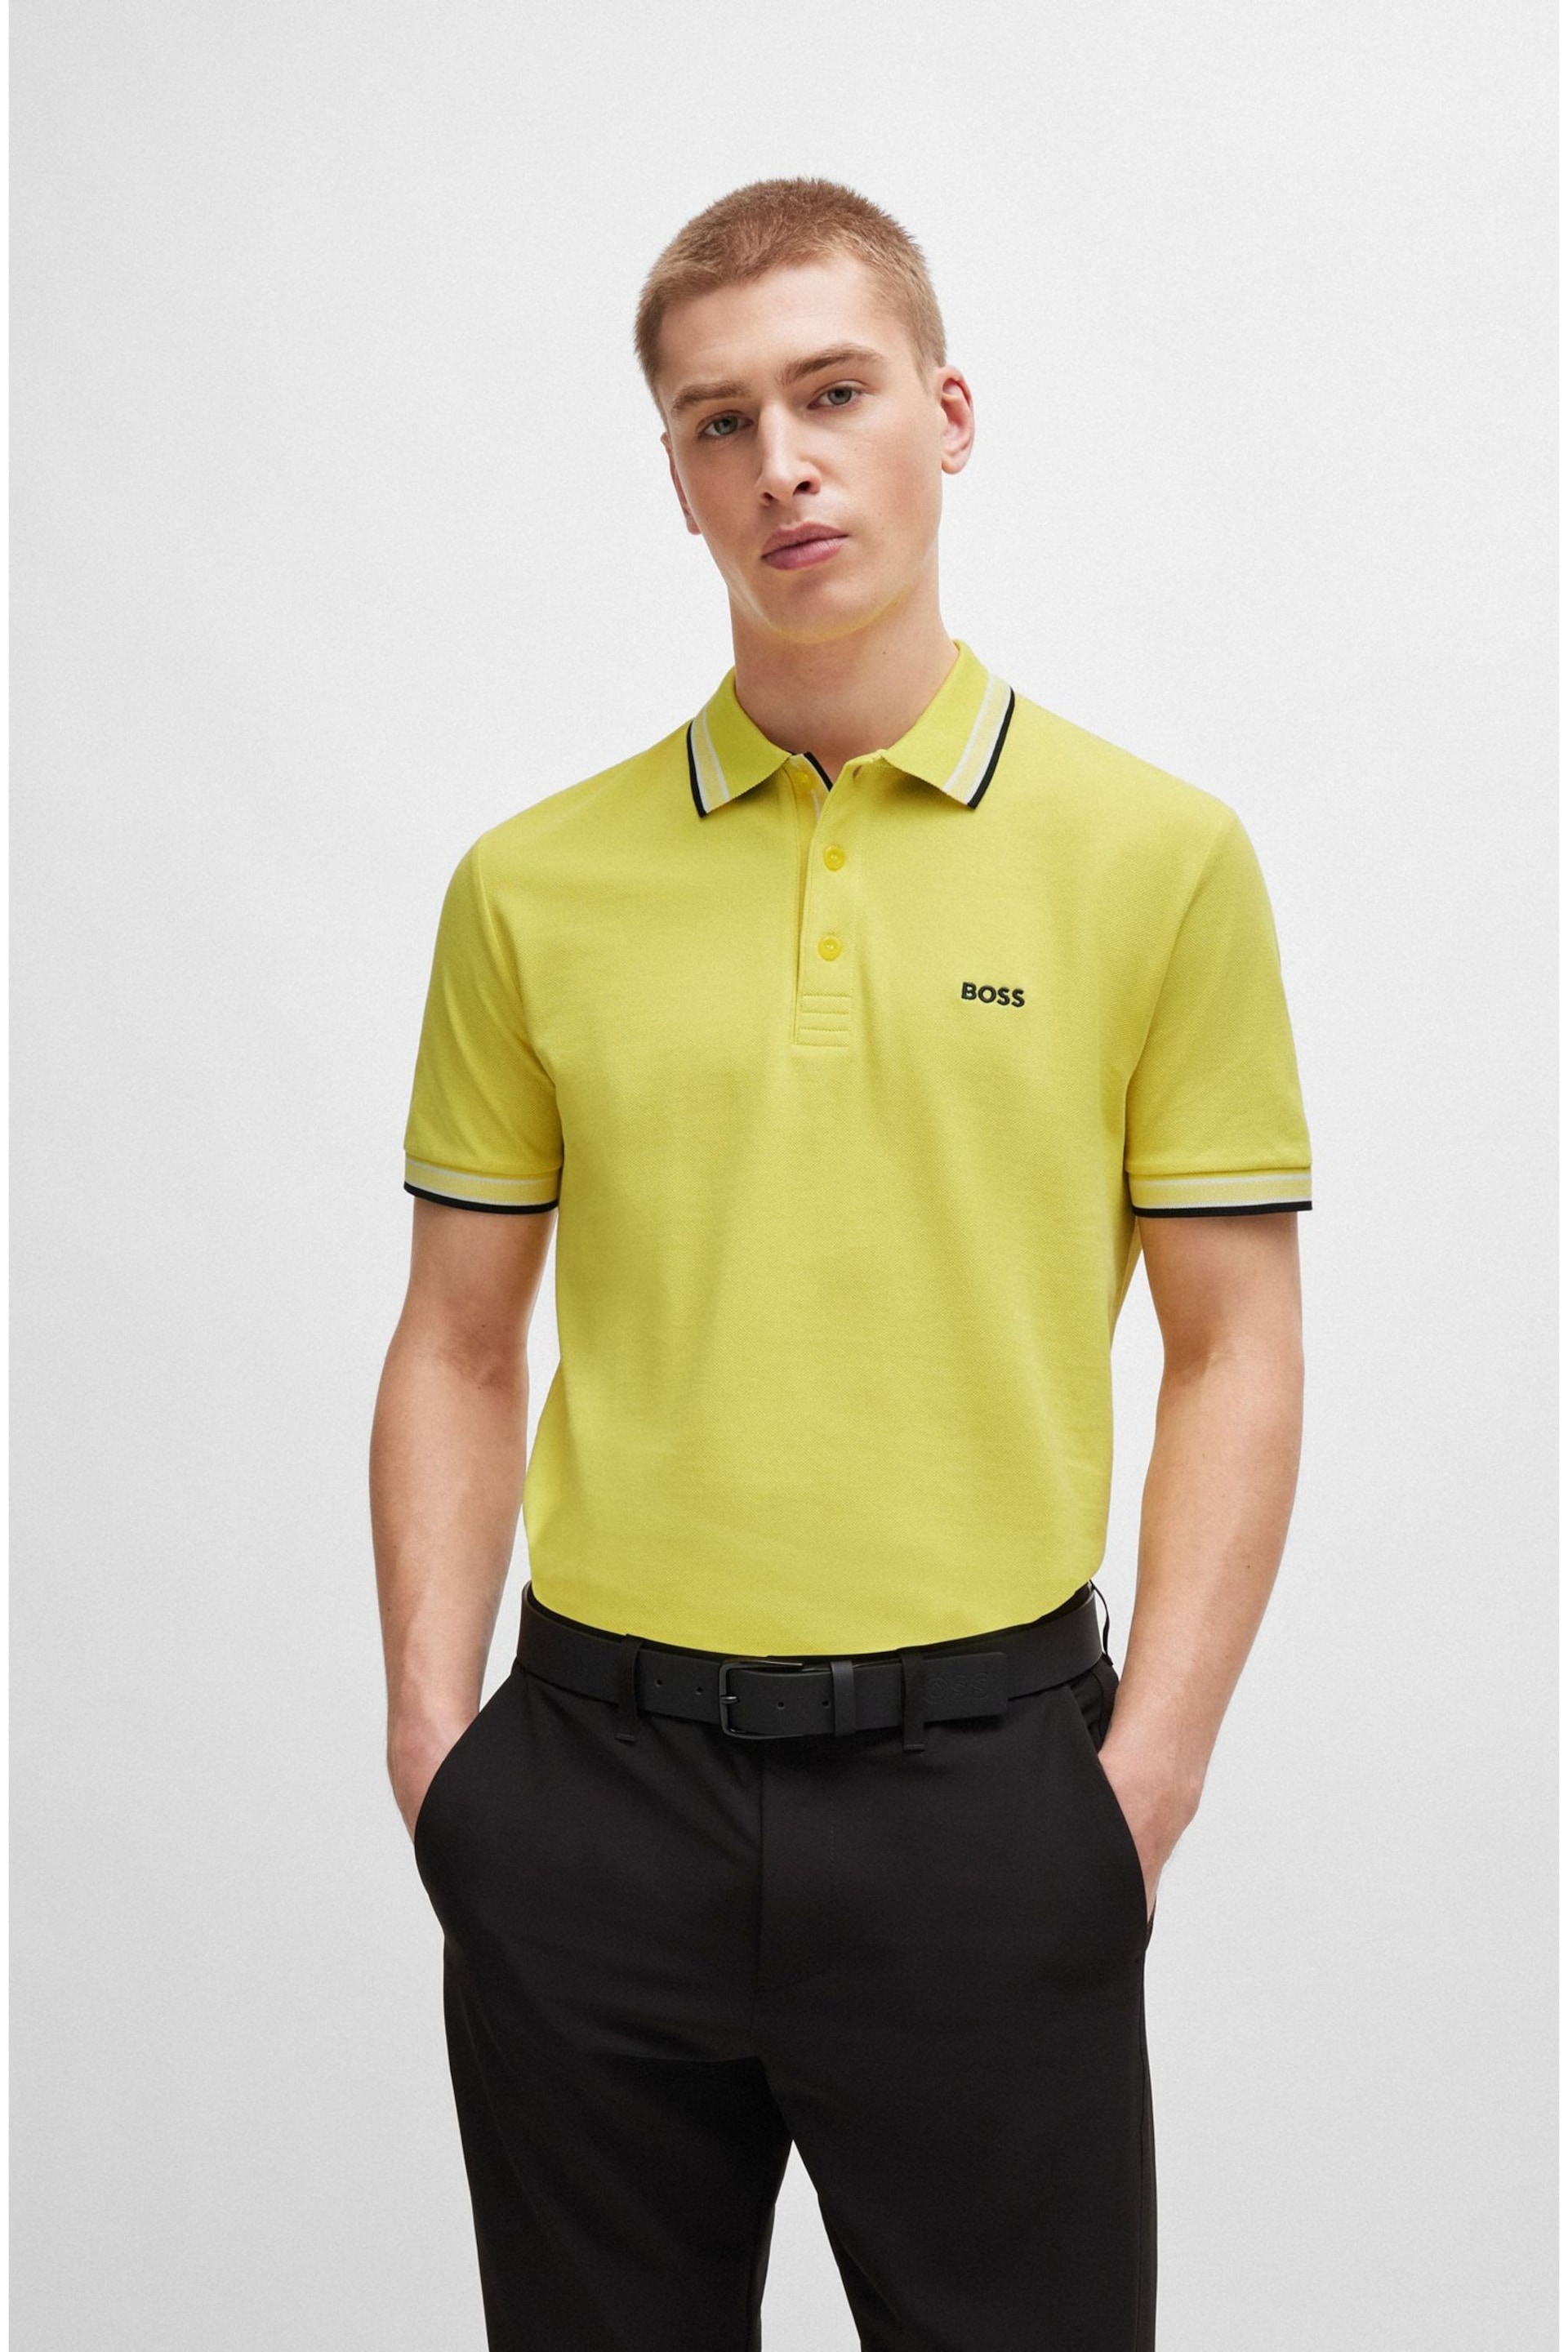 BOSS Yellow Cotton Polo Shirt With Contrast Logo Details - Image 2 of 5